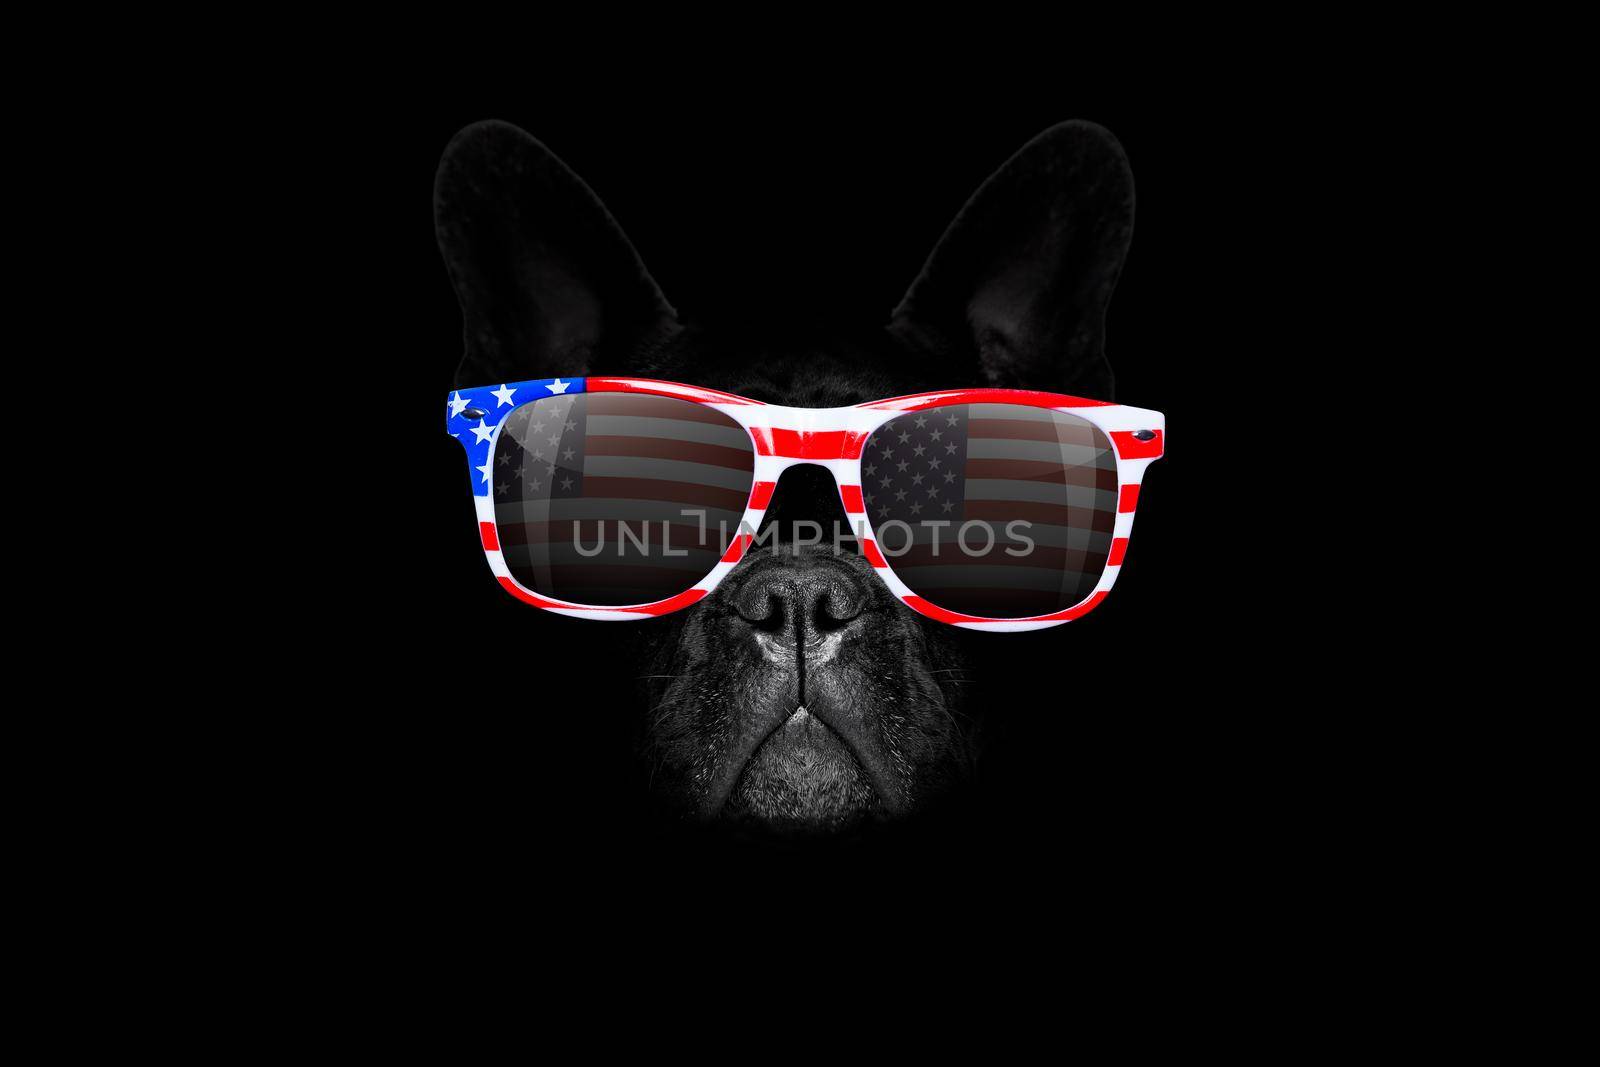 french bulldog  dog   4th of July  on independence day, isolated on black dark  background wearing sunglasses